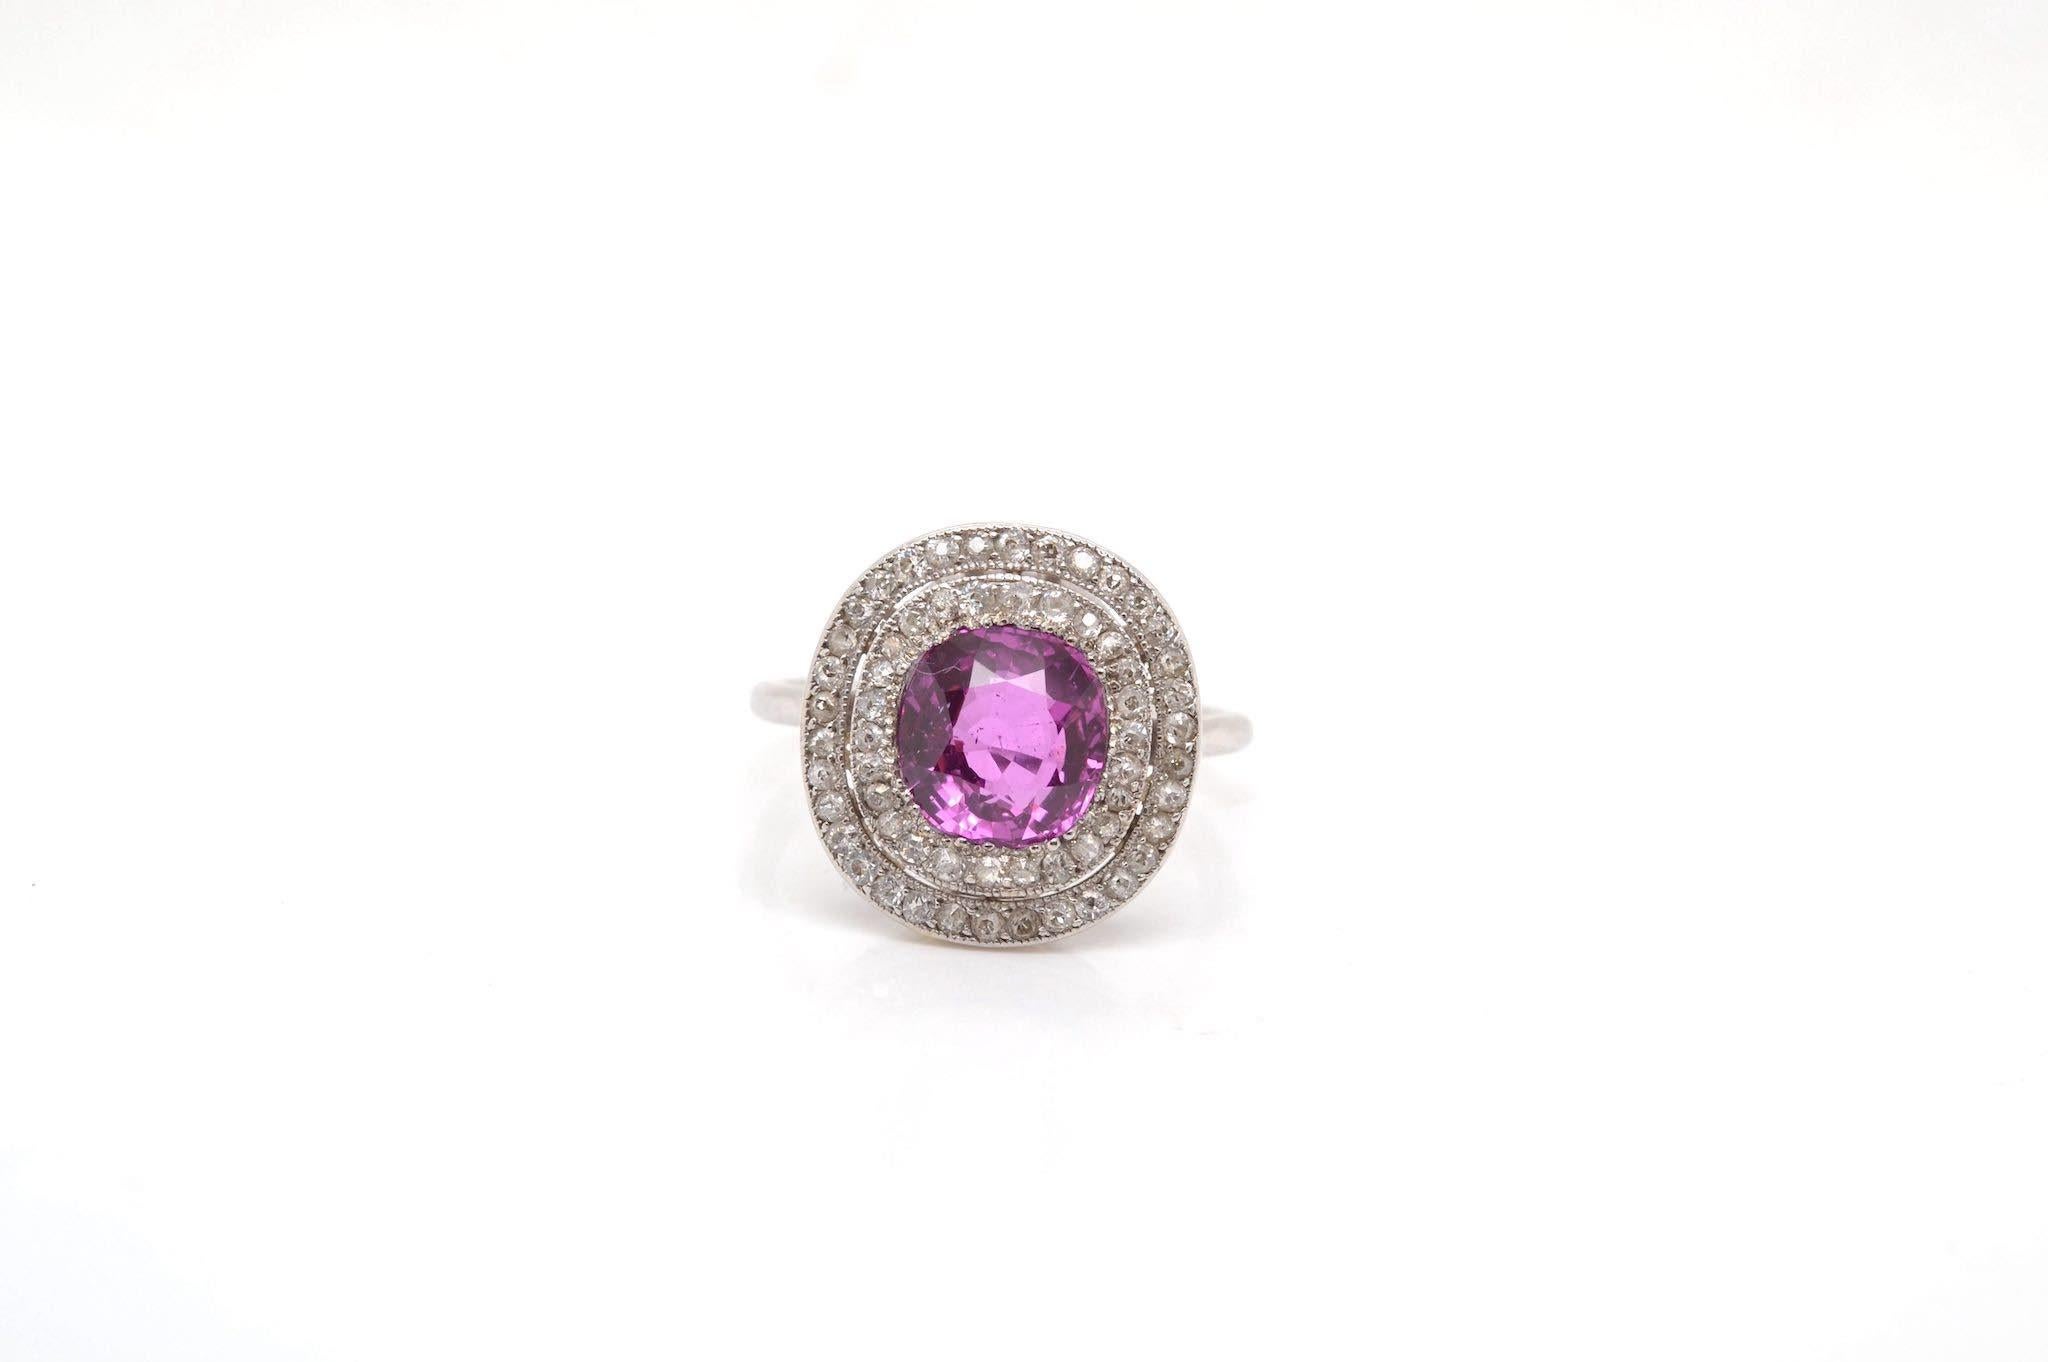 Stones: Ceylon pink sapphire, weight: 2.67cts and surrounding old cut diamonds, weight: 0.70ct
Material: Platinum
Dimensions: 1.7cm x 1.5cm
Weight: 5.8g
Size: 55 (free sizing)
Period: Early 20th
Certificate
Ref. : 24927